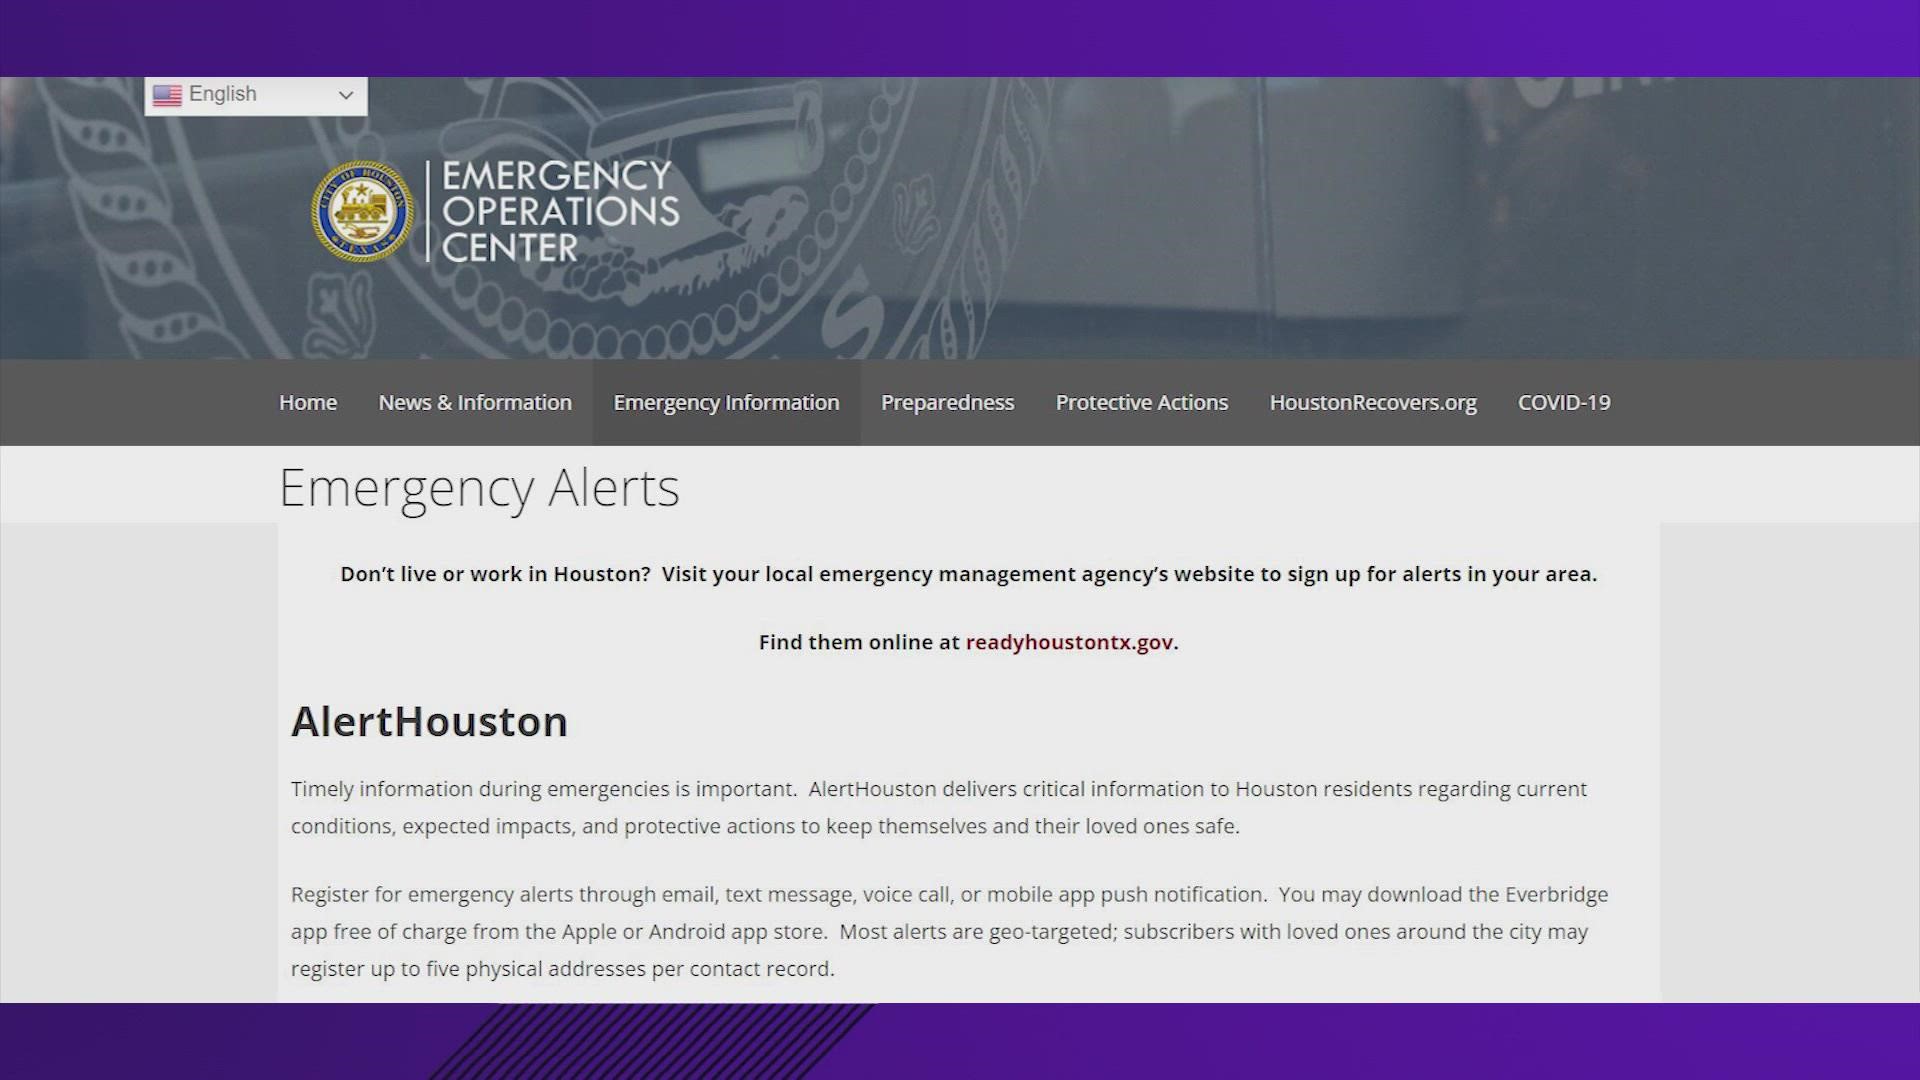 By registering, you'll be notified by the city for emergencies.